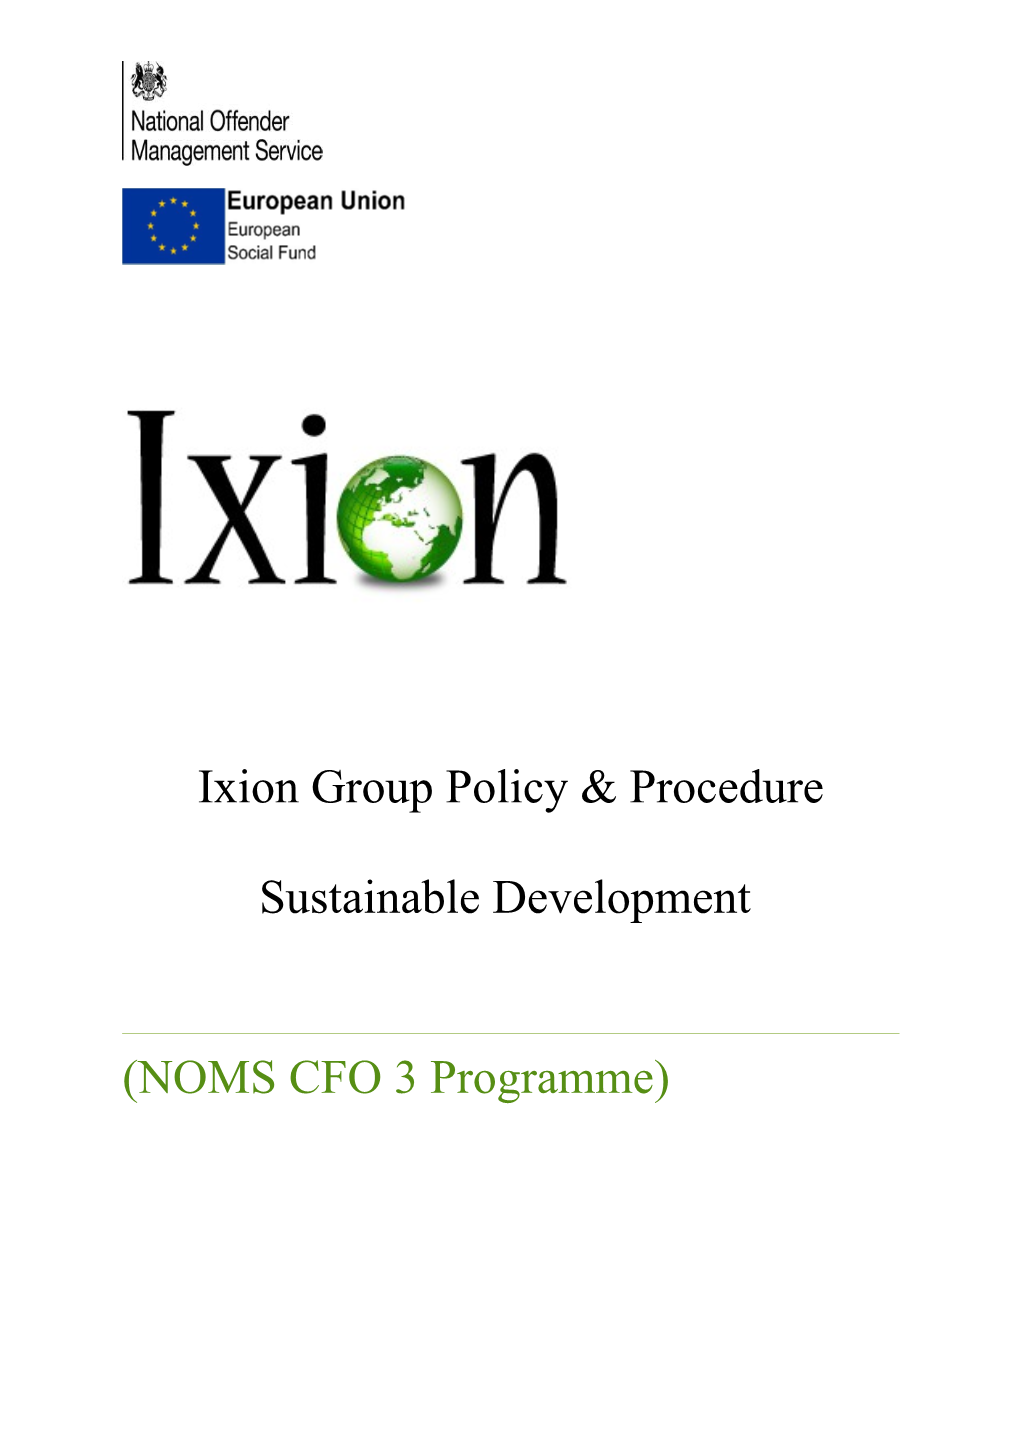 Ixion Group Policy & Procedure